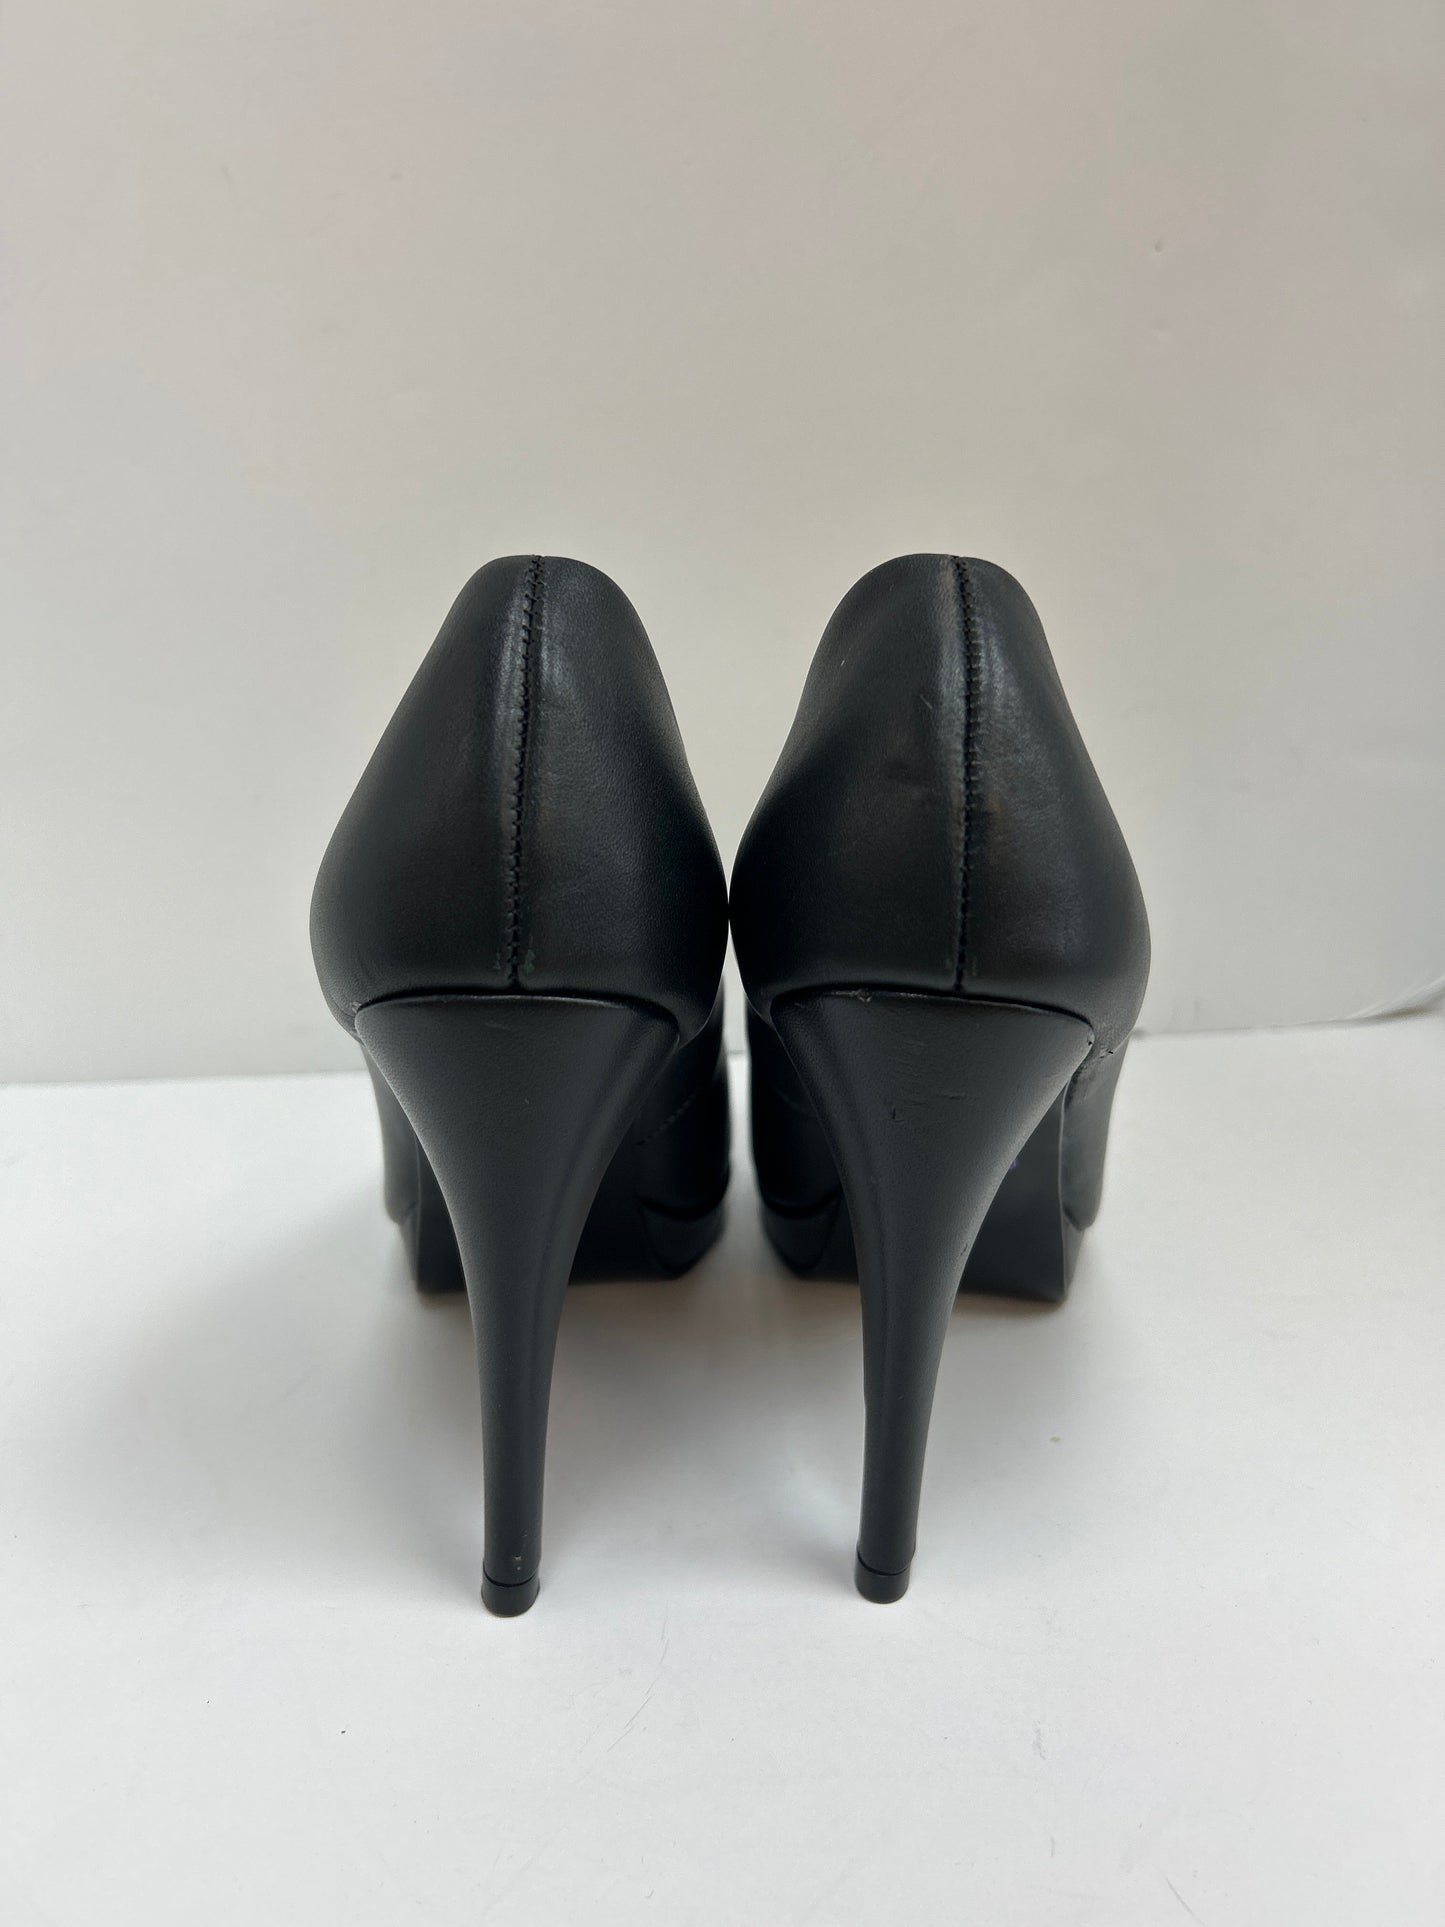 Shoes Heels Stiletto By Clothes Mentor  Size: 10